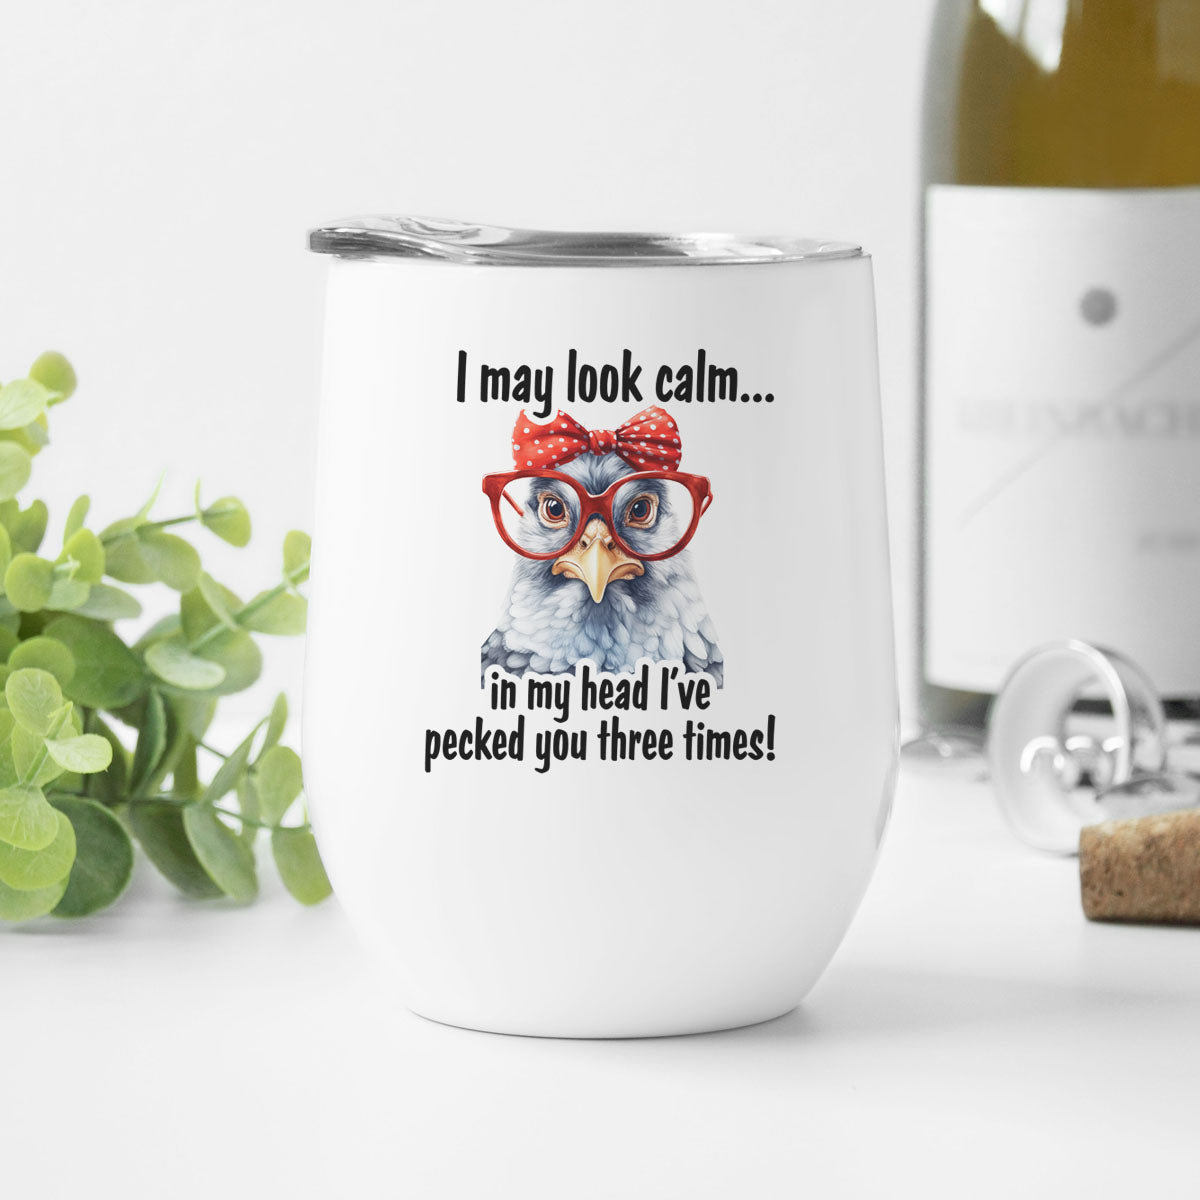 I May Look Calm In My Head I've Pecked You Three Times White Chicken Wine Tumbler Cup with Lid